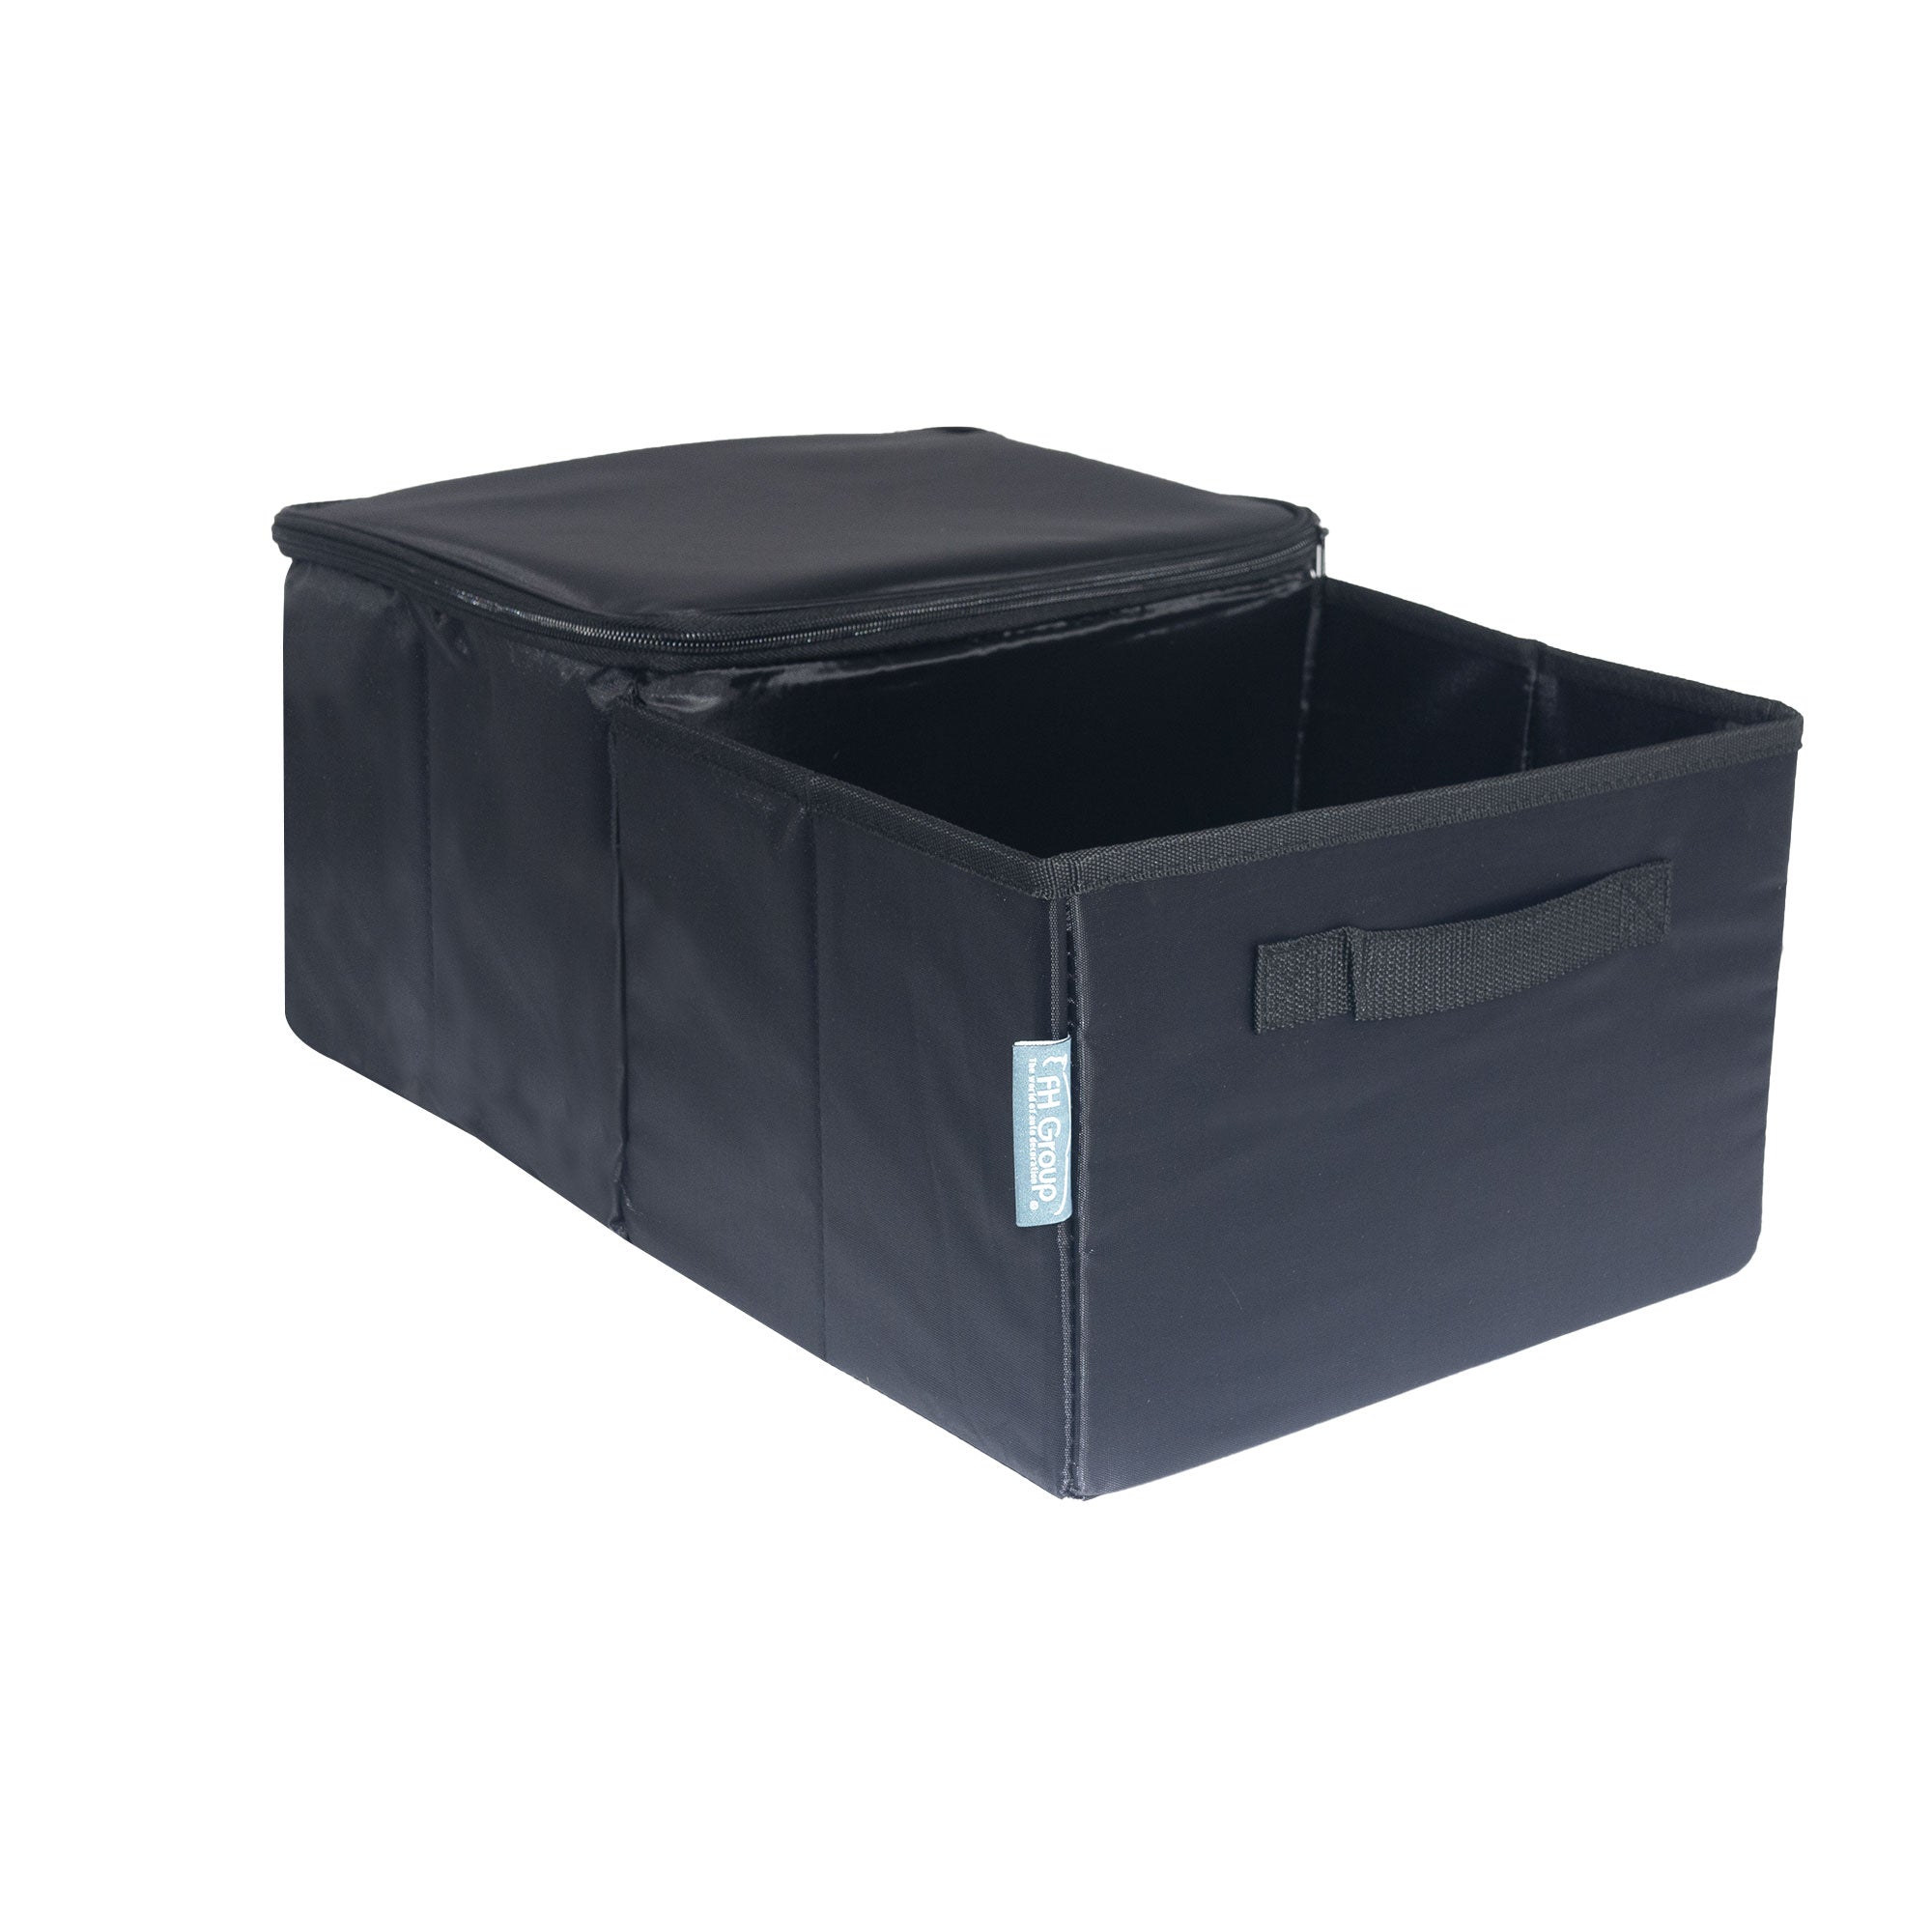 E-Z Travel Dual Purpose Trunk Organizer with Insulated Cooler Black